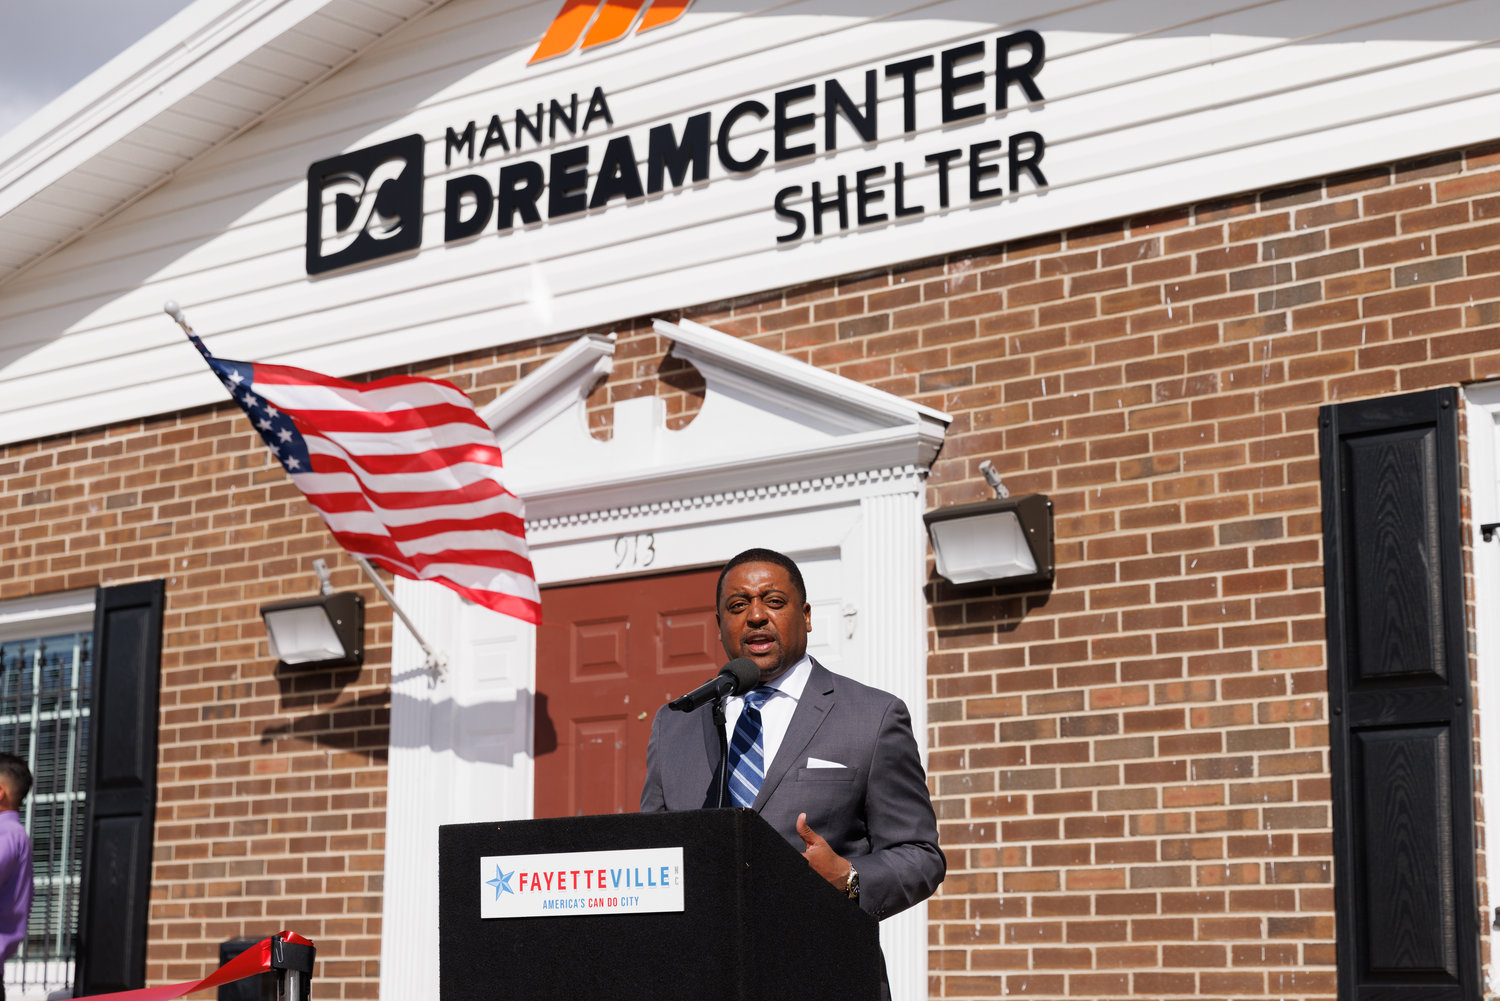 Fayetteville Mayor Mitch Colvin talks during the ribbon-cutting for the Manna Dream Center Shelter at 913 Person St. on Friday.